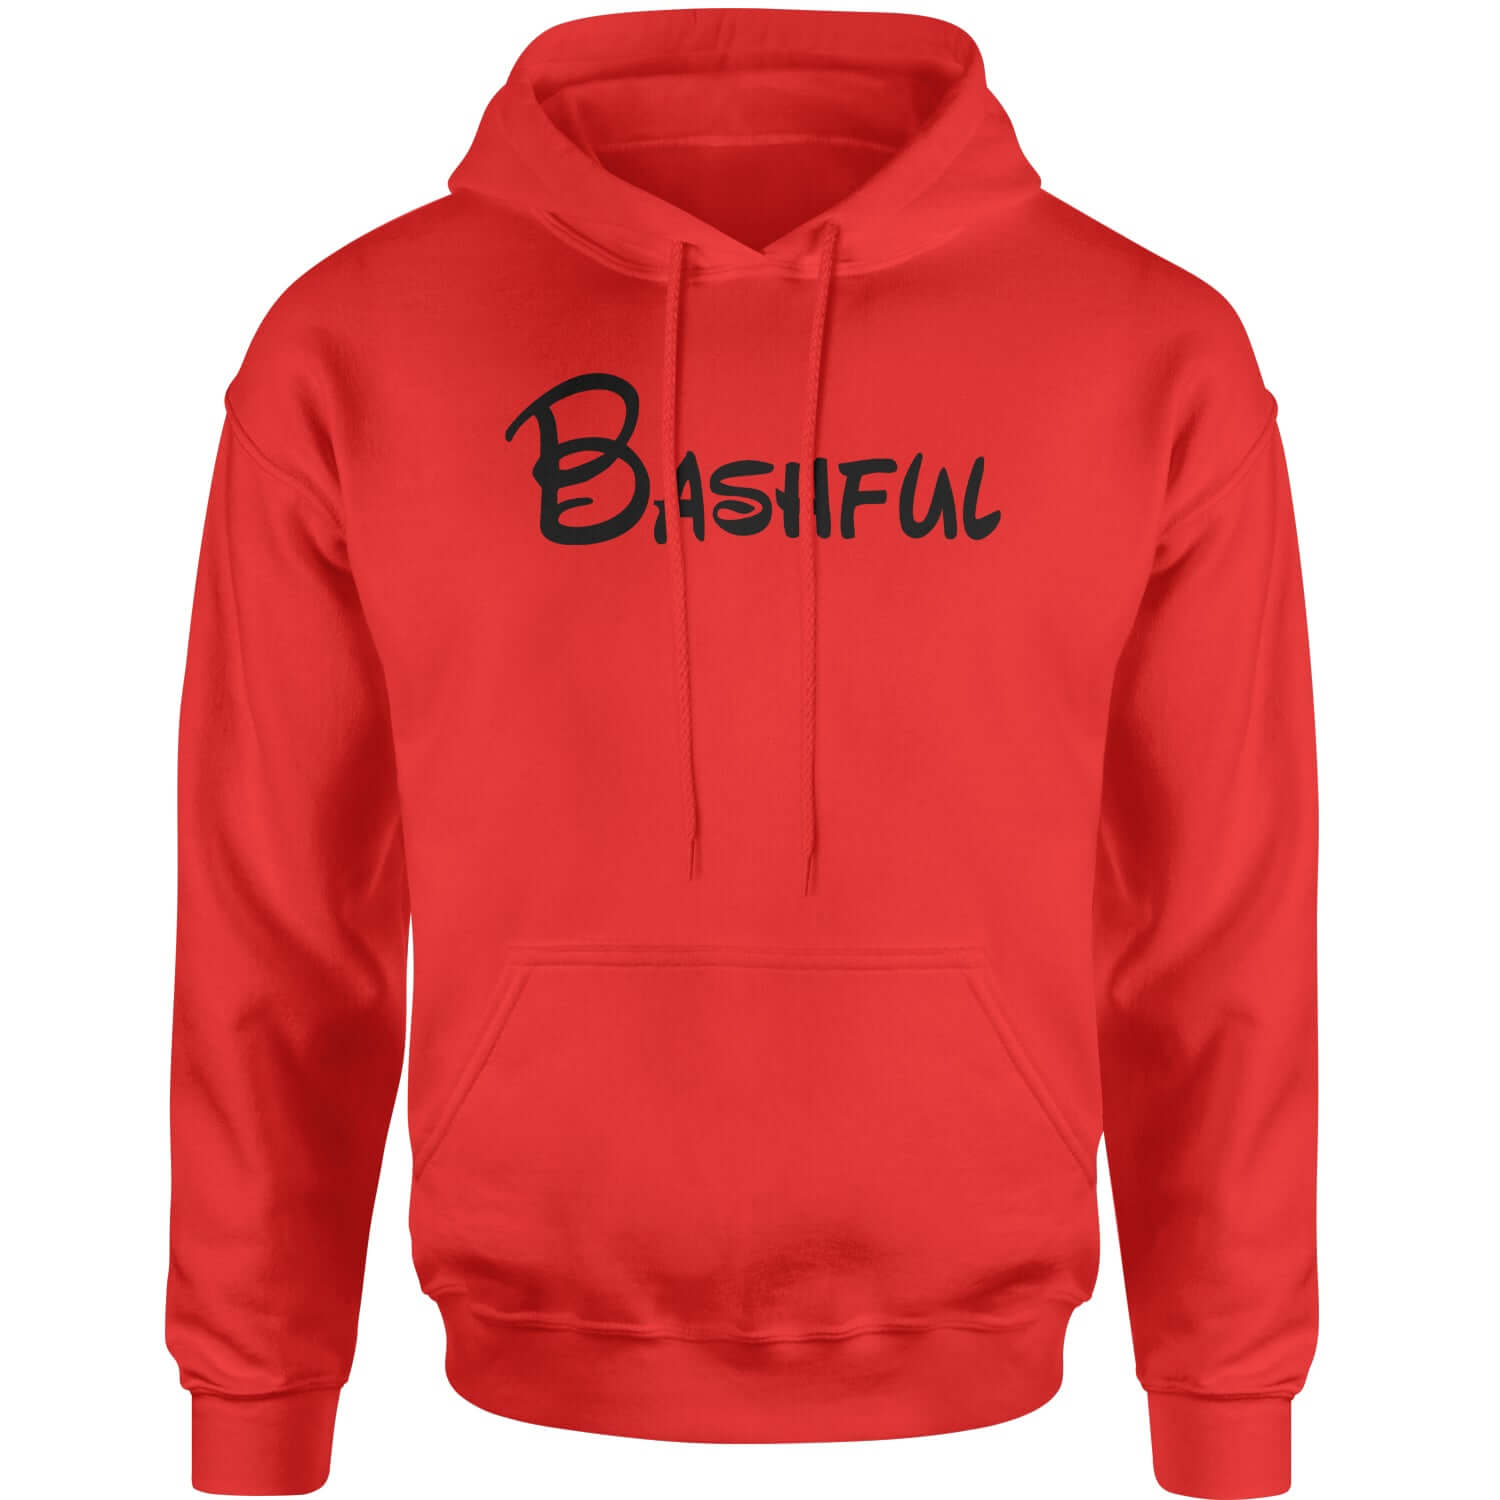 Bashful - 7 Dwarfs Costume Adult Hoodie Sweatshirt and, costume, dwarfs, group, halloween, matching, seven, snow, the, white by Expression Tees